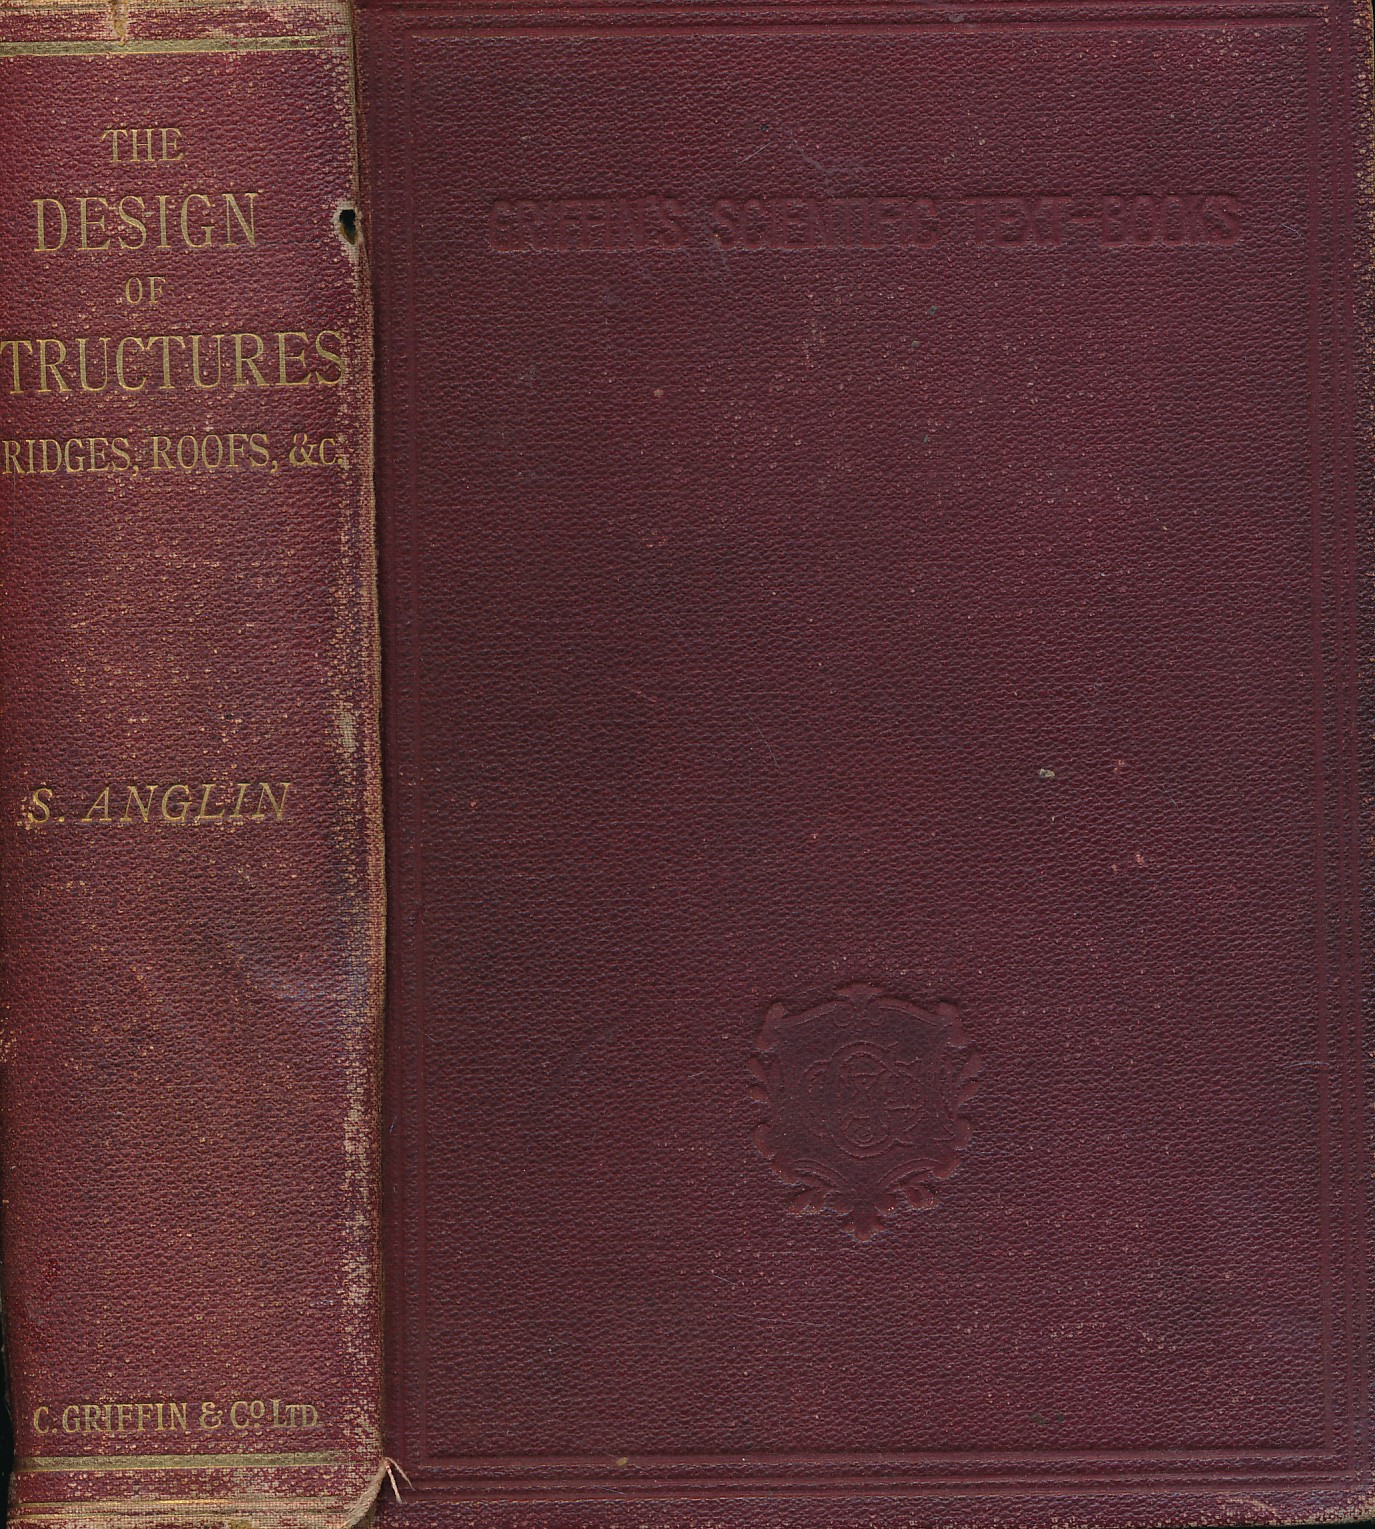 The Design of Structures. A Practical Treatise on the Building of Bridges, Roofs &c.